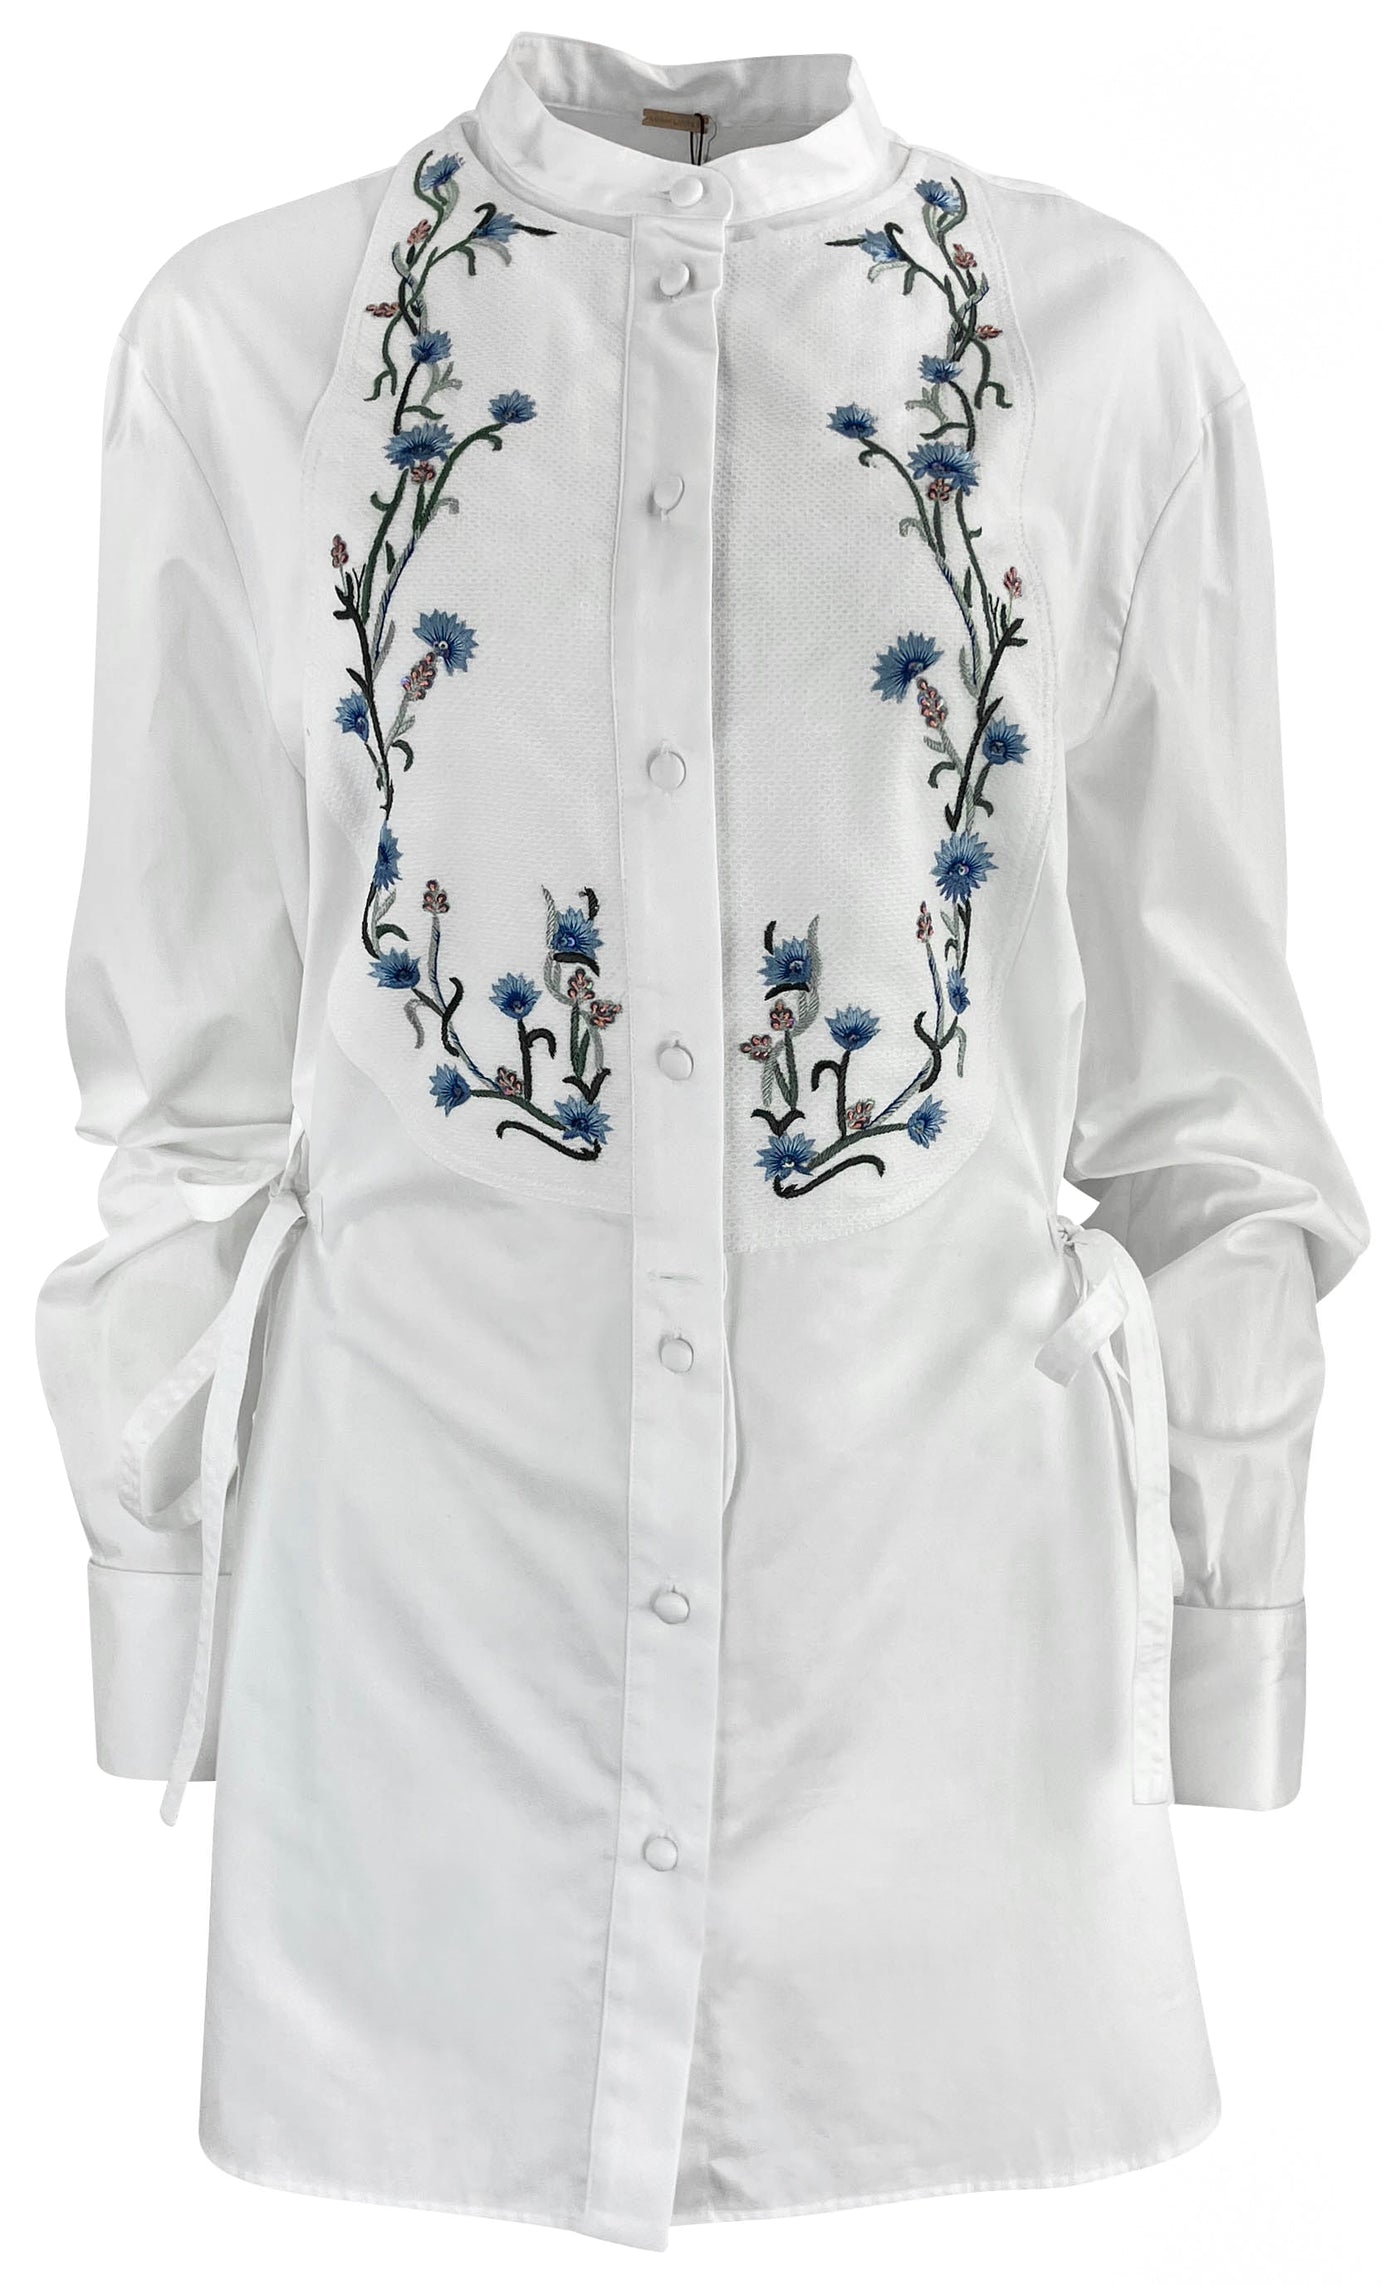 Adam Lippes Embroidered Tuxedo Shirt in White/Cornflower - Discounts on Adam Lippes at UAL